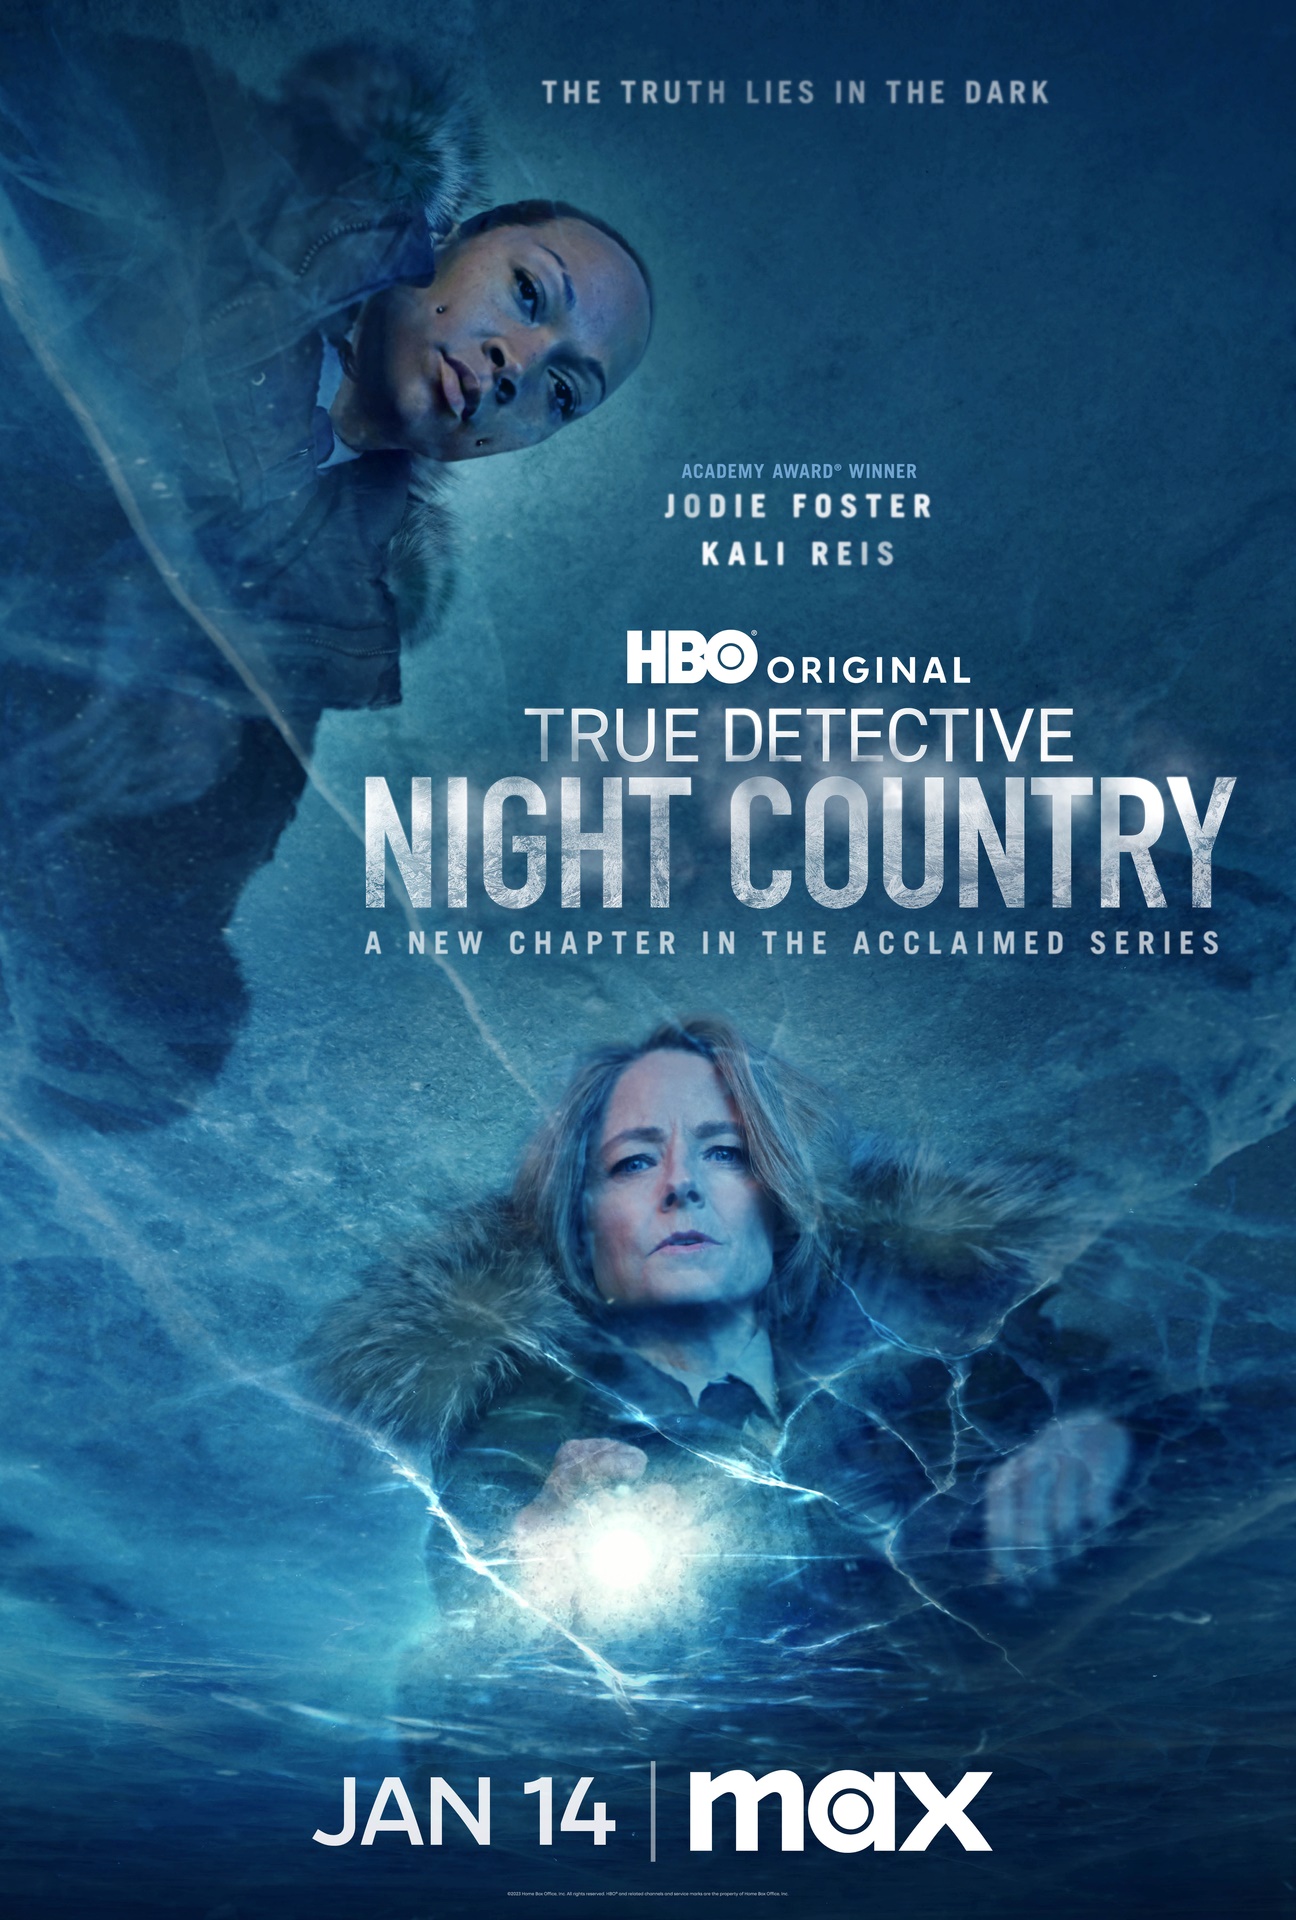 Promotional poster for True Detective: Night Country: icy blue background and actors Jodie Foster and Kali Reis pictured